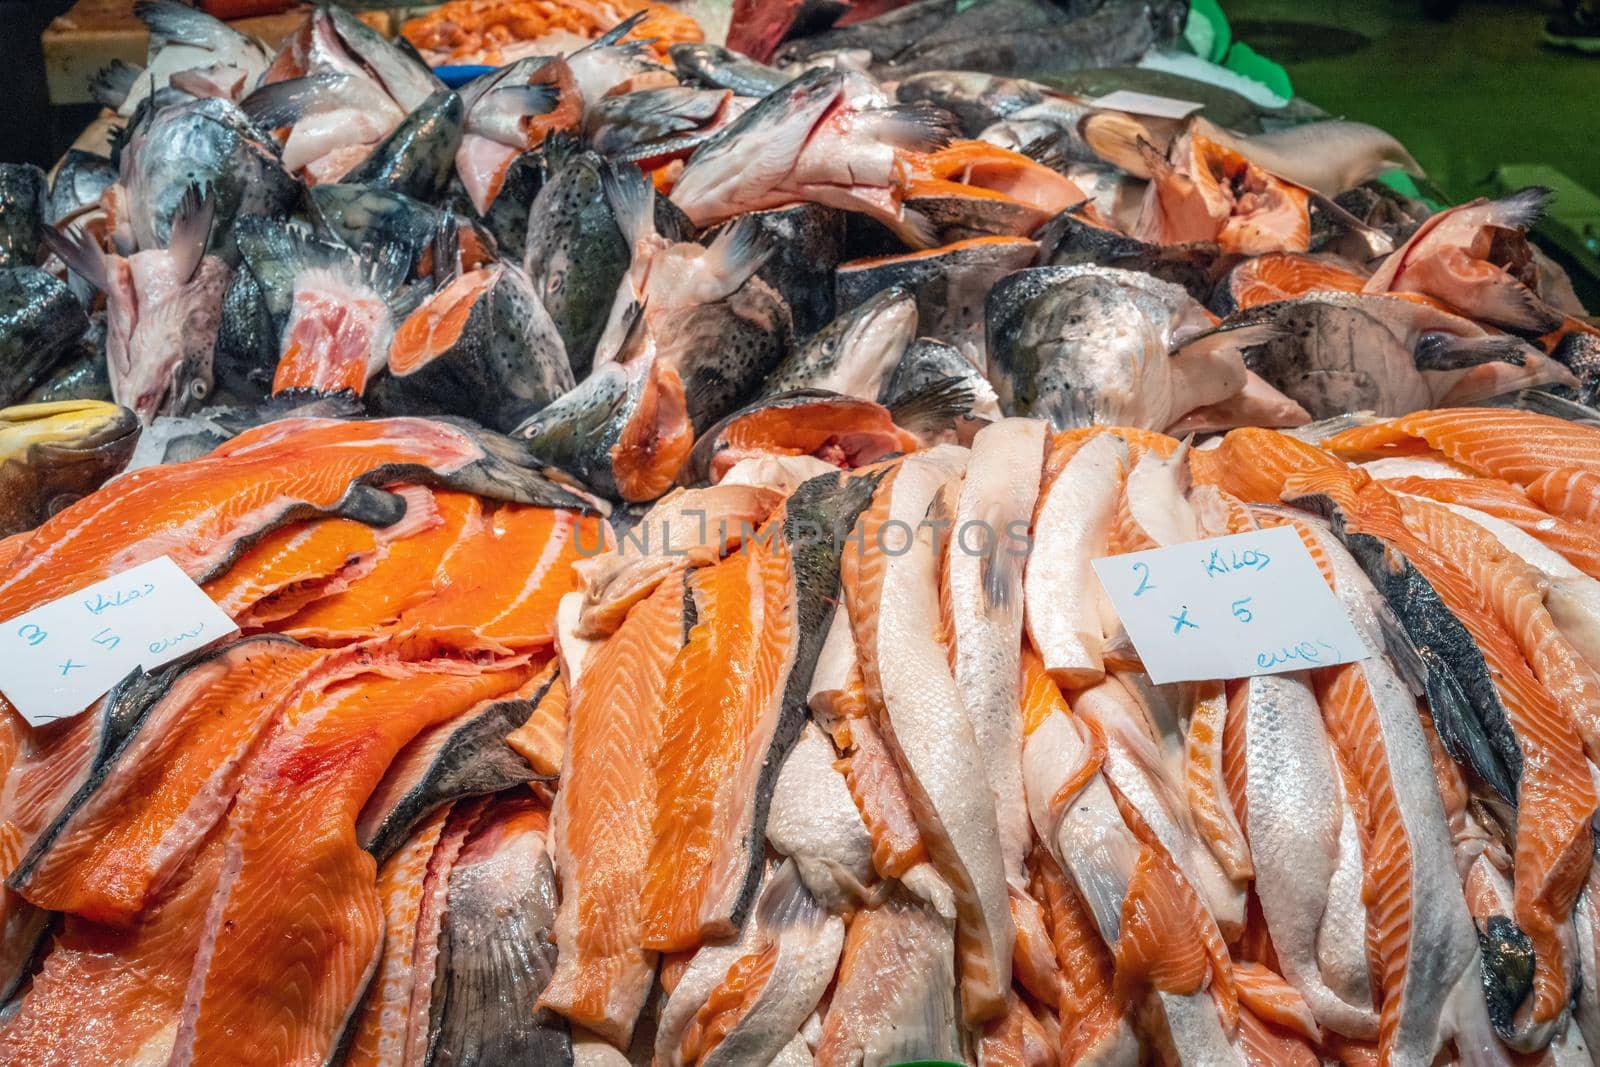 Pieces of salmon for sale at a market in Spain